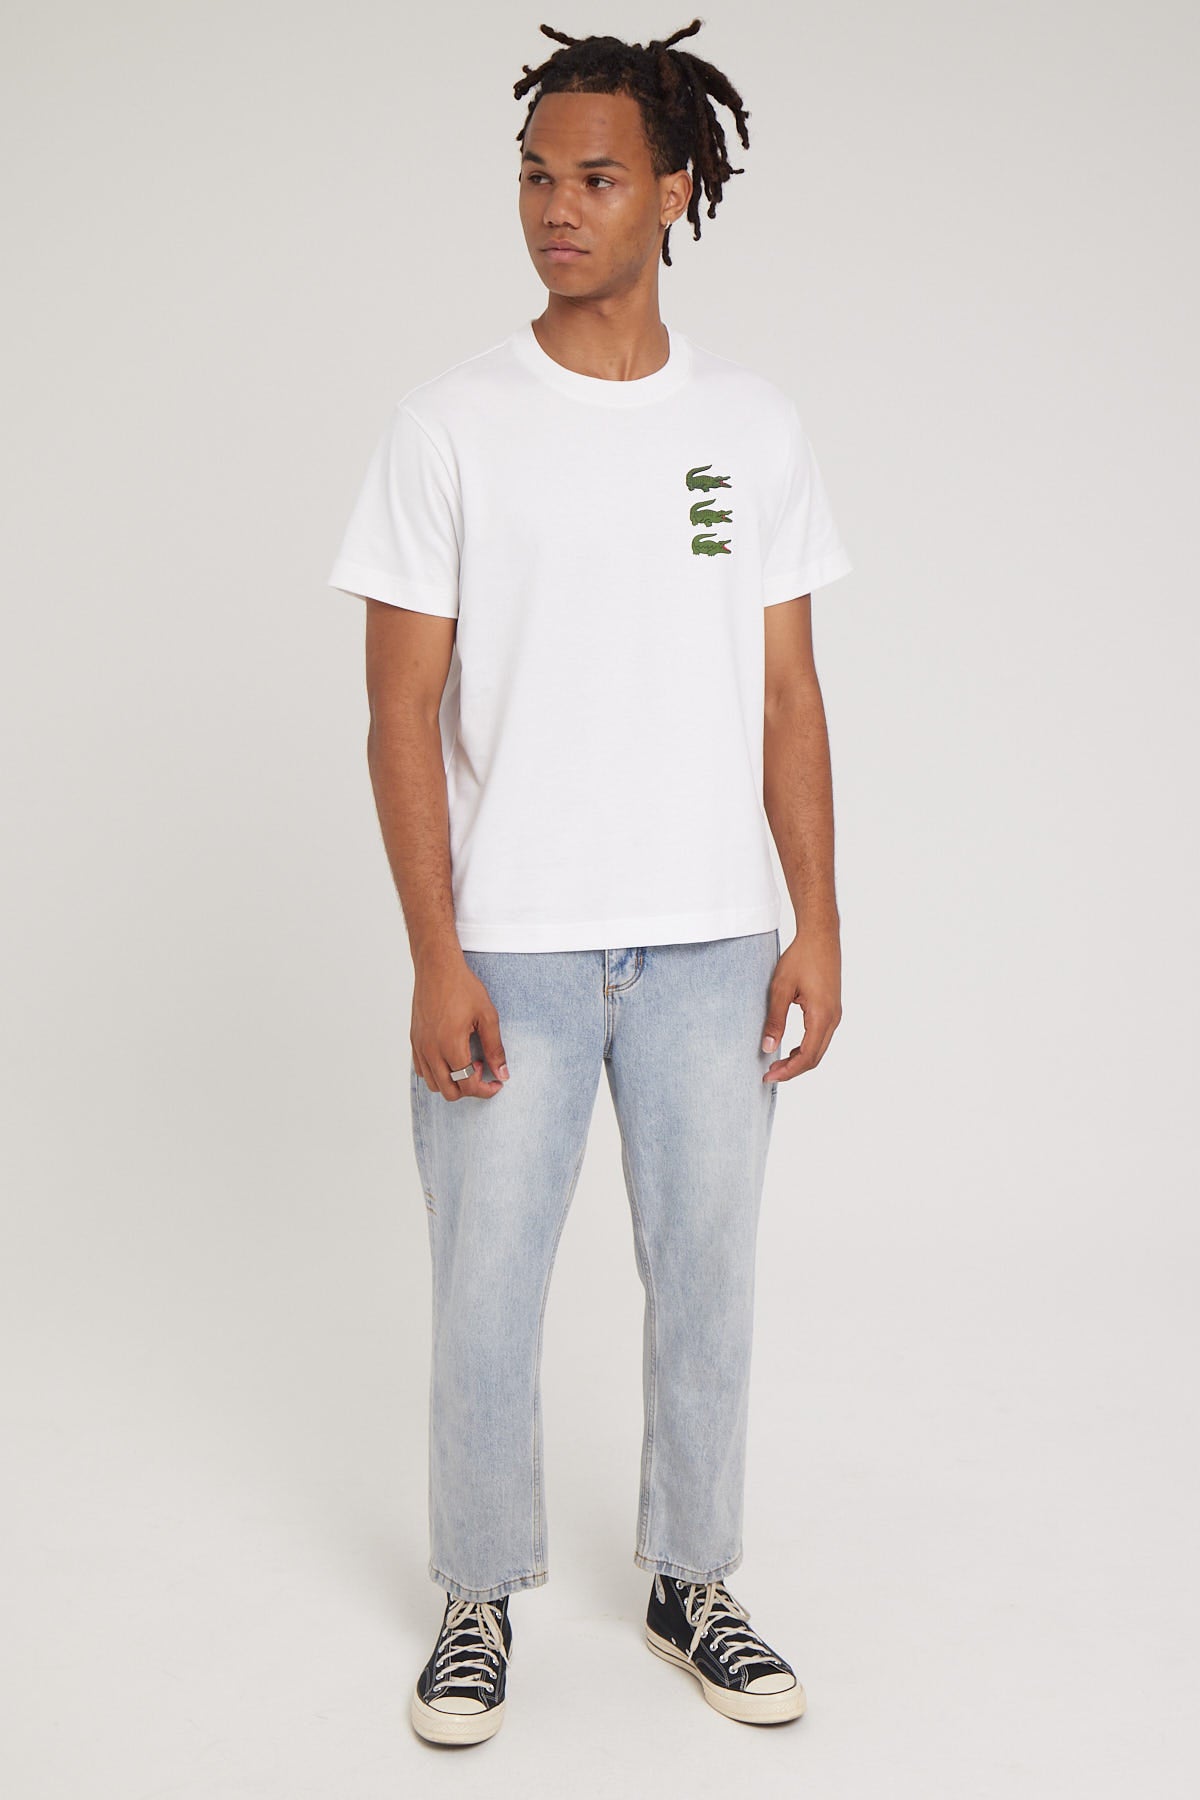 Lacoste Holiday Icons 3 Croc T-Shirt White – Universal Store